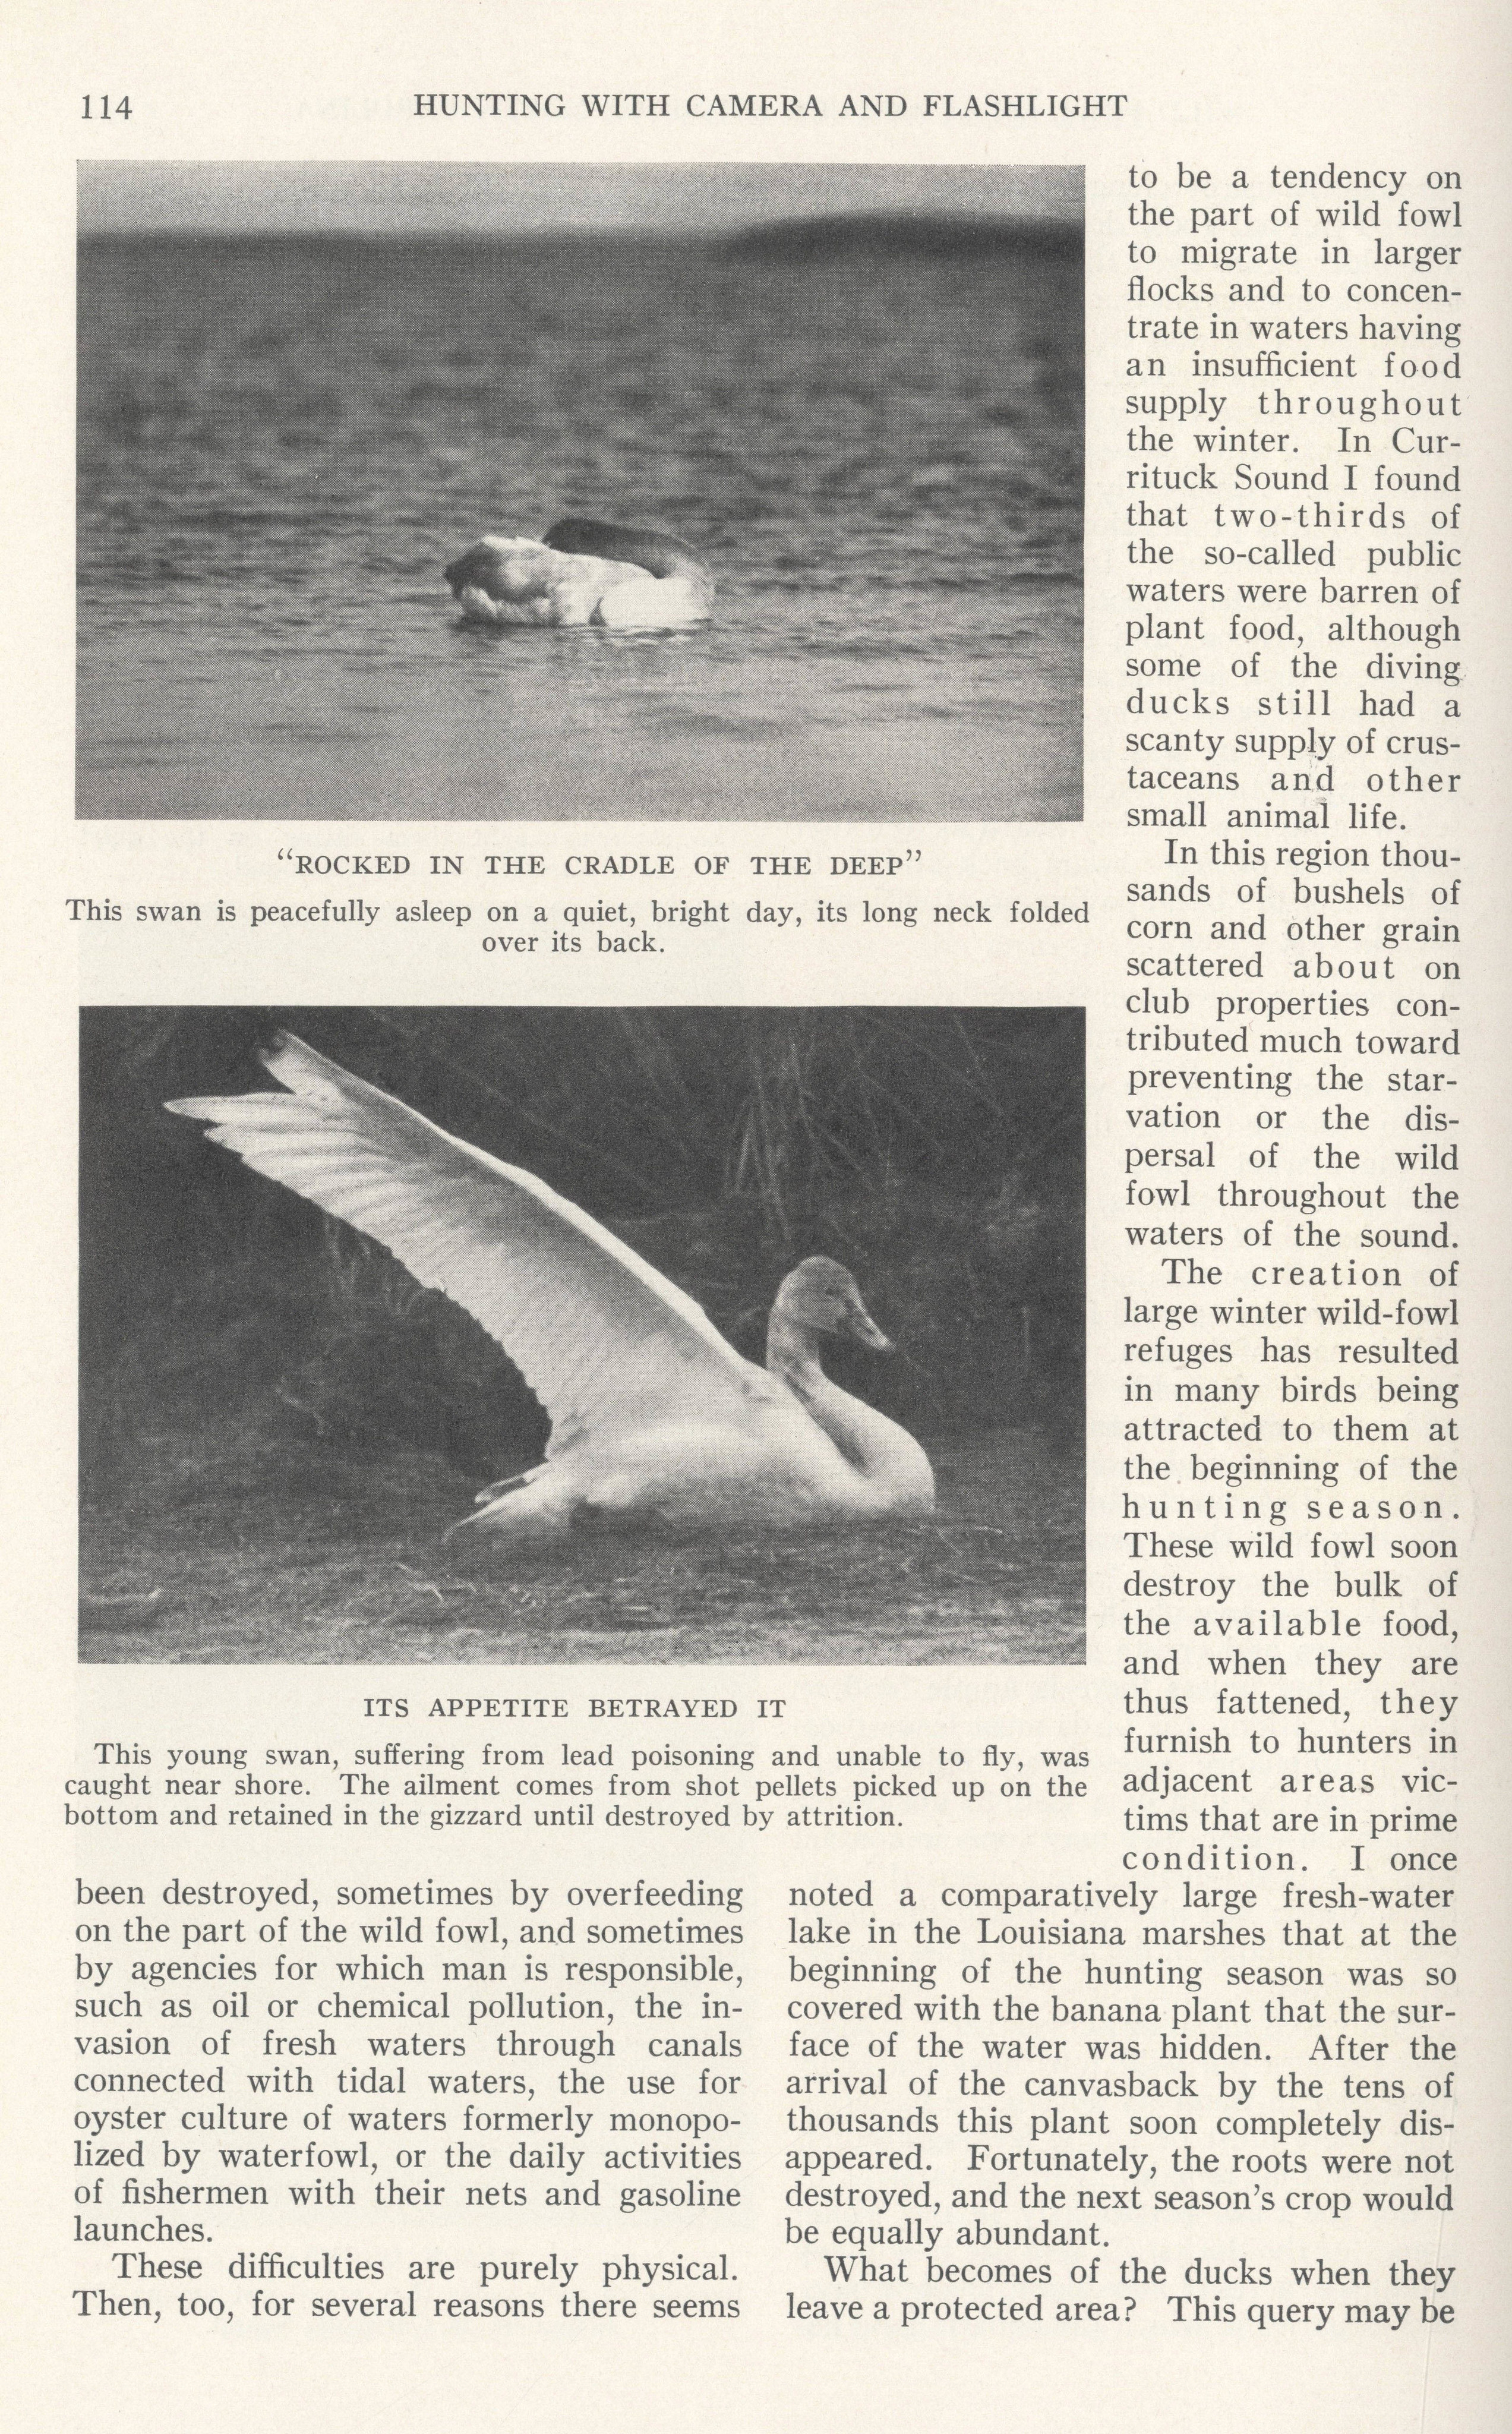 George Shiras 3rd :: Young swan suffering from lead poisoning. Published in Hunting wild life with camera and flashlight : a record of sixty-five years’ visits to the woods and waters of North America. Volume II, 1935. Full page 114. | src Memorial University of Newfoundland